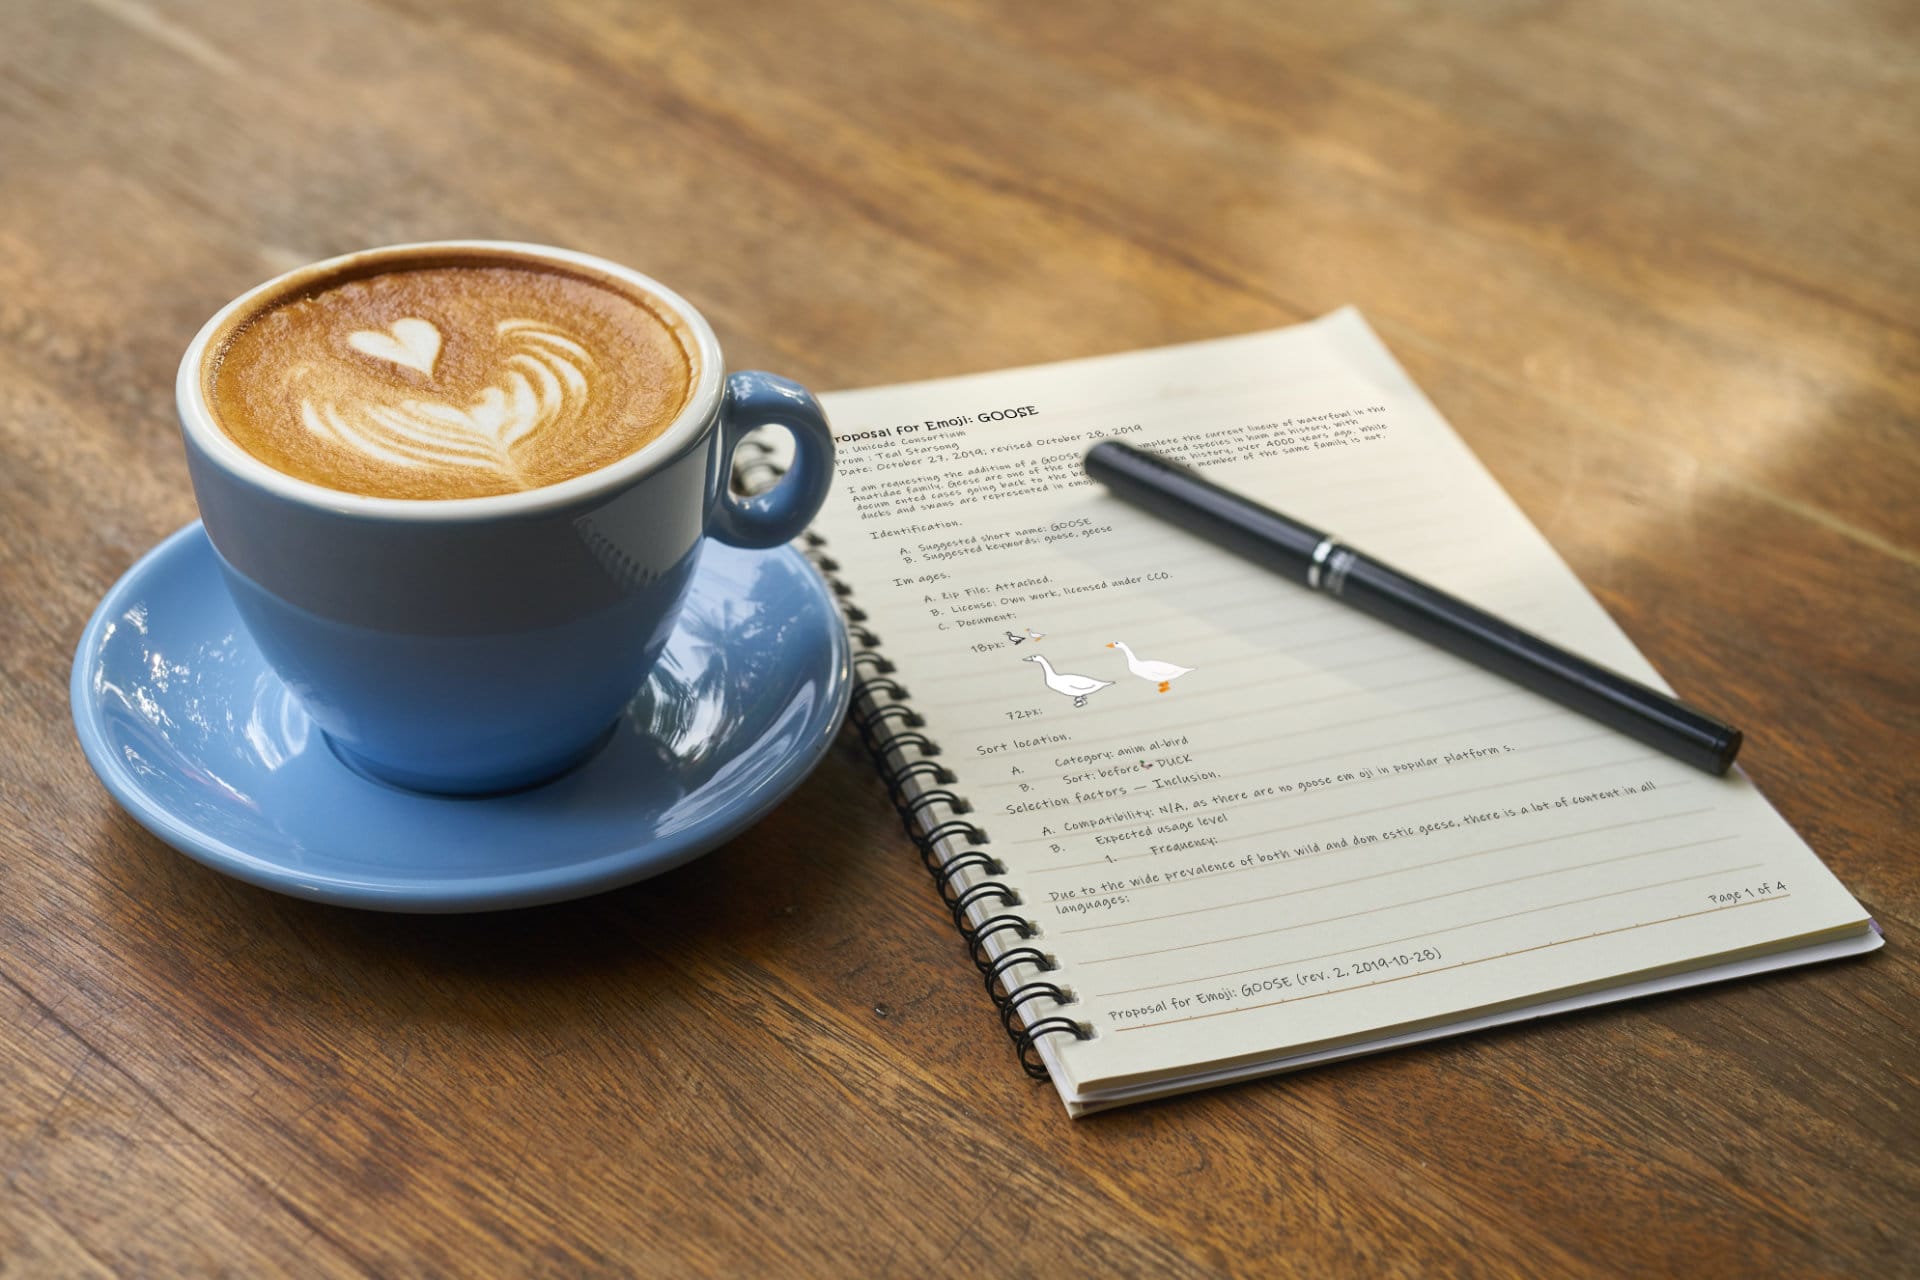 Photo of a paper notebook next to a cup of coffee on a wooden table surface.